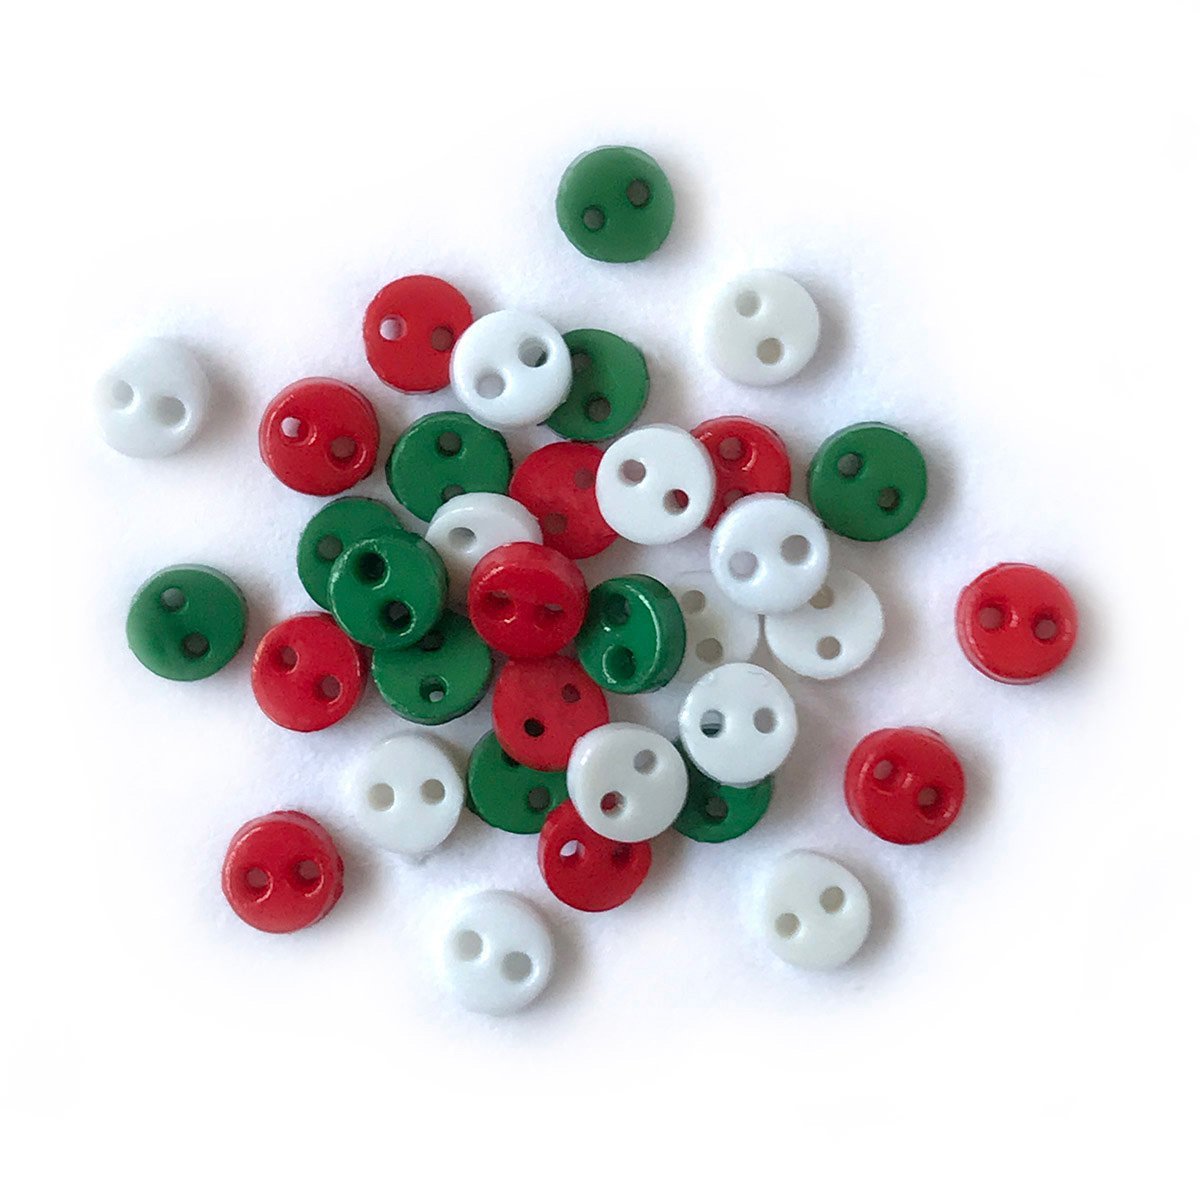 Buttonsmini Crafts Colorful Tiny Assorted Sewing Small Fancy DIY Button Materials Christmas, Size: 1.5X1.5CM